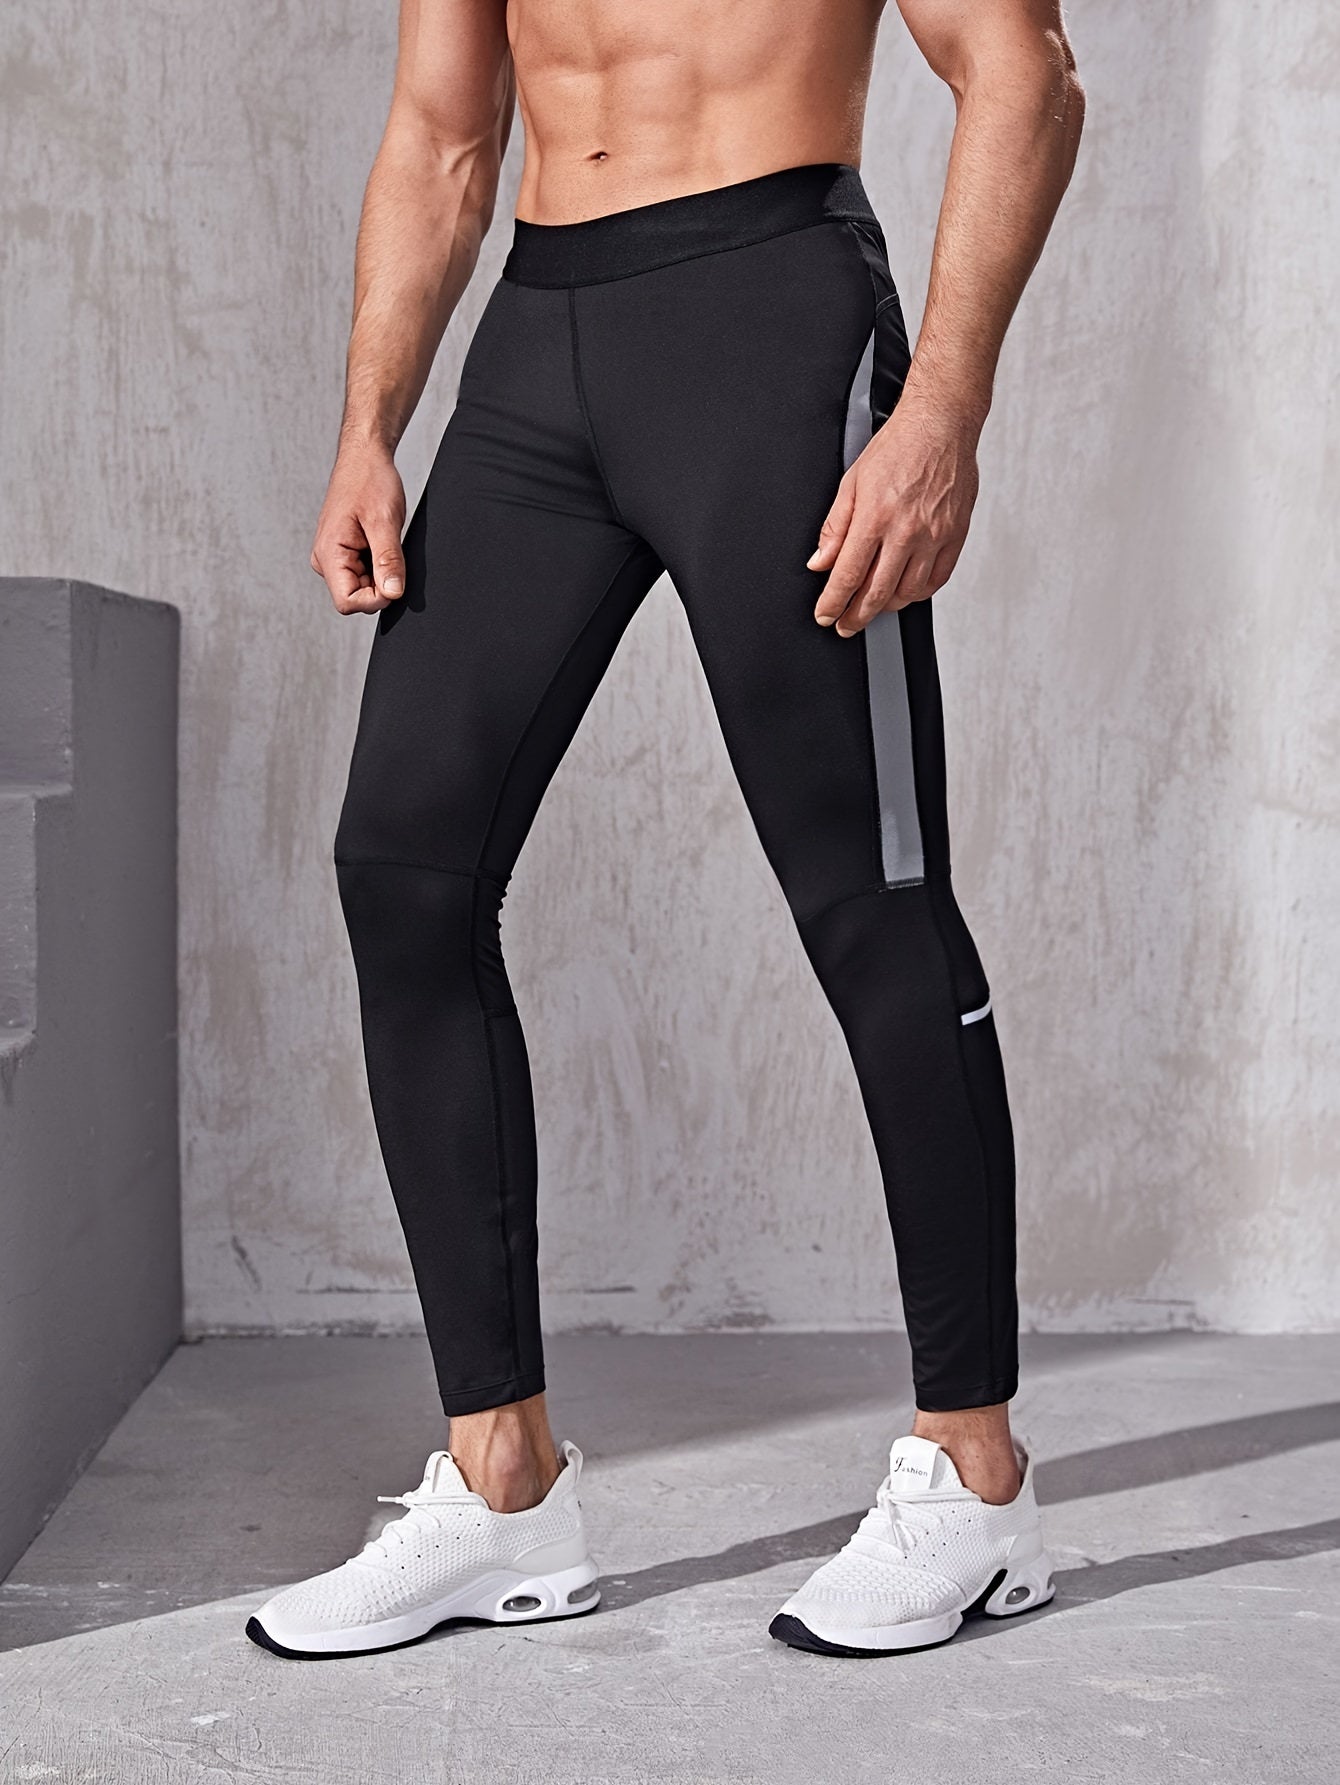 Men's Quick-drying Compression Fitness Pants, Casual High-elastic Leggings For Outdoor Gym Fitness Running